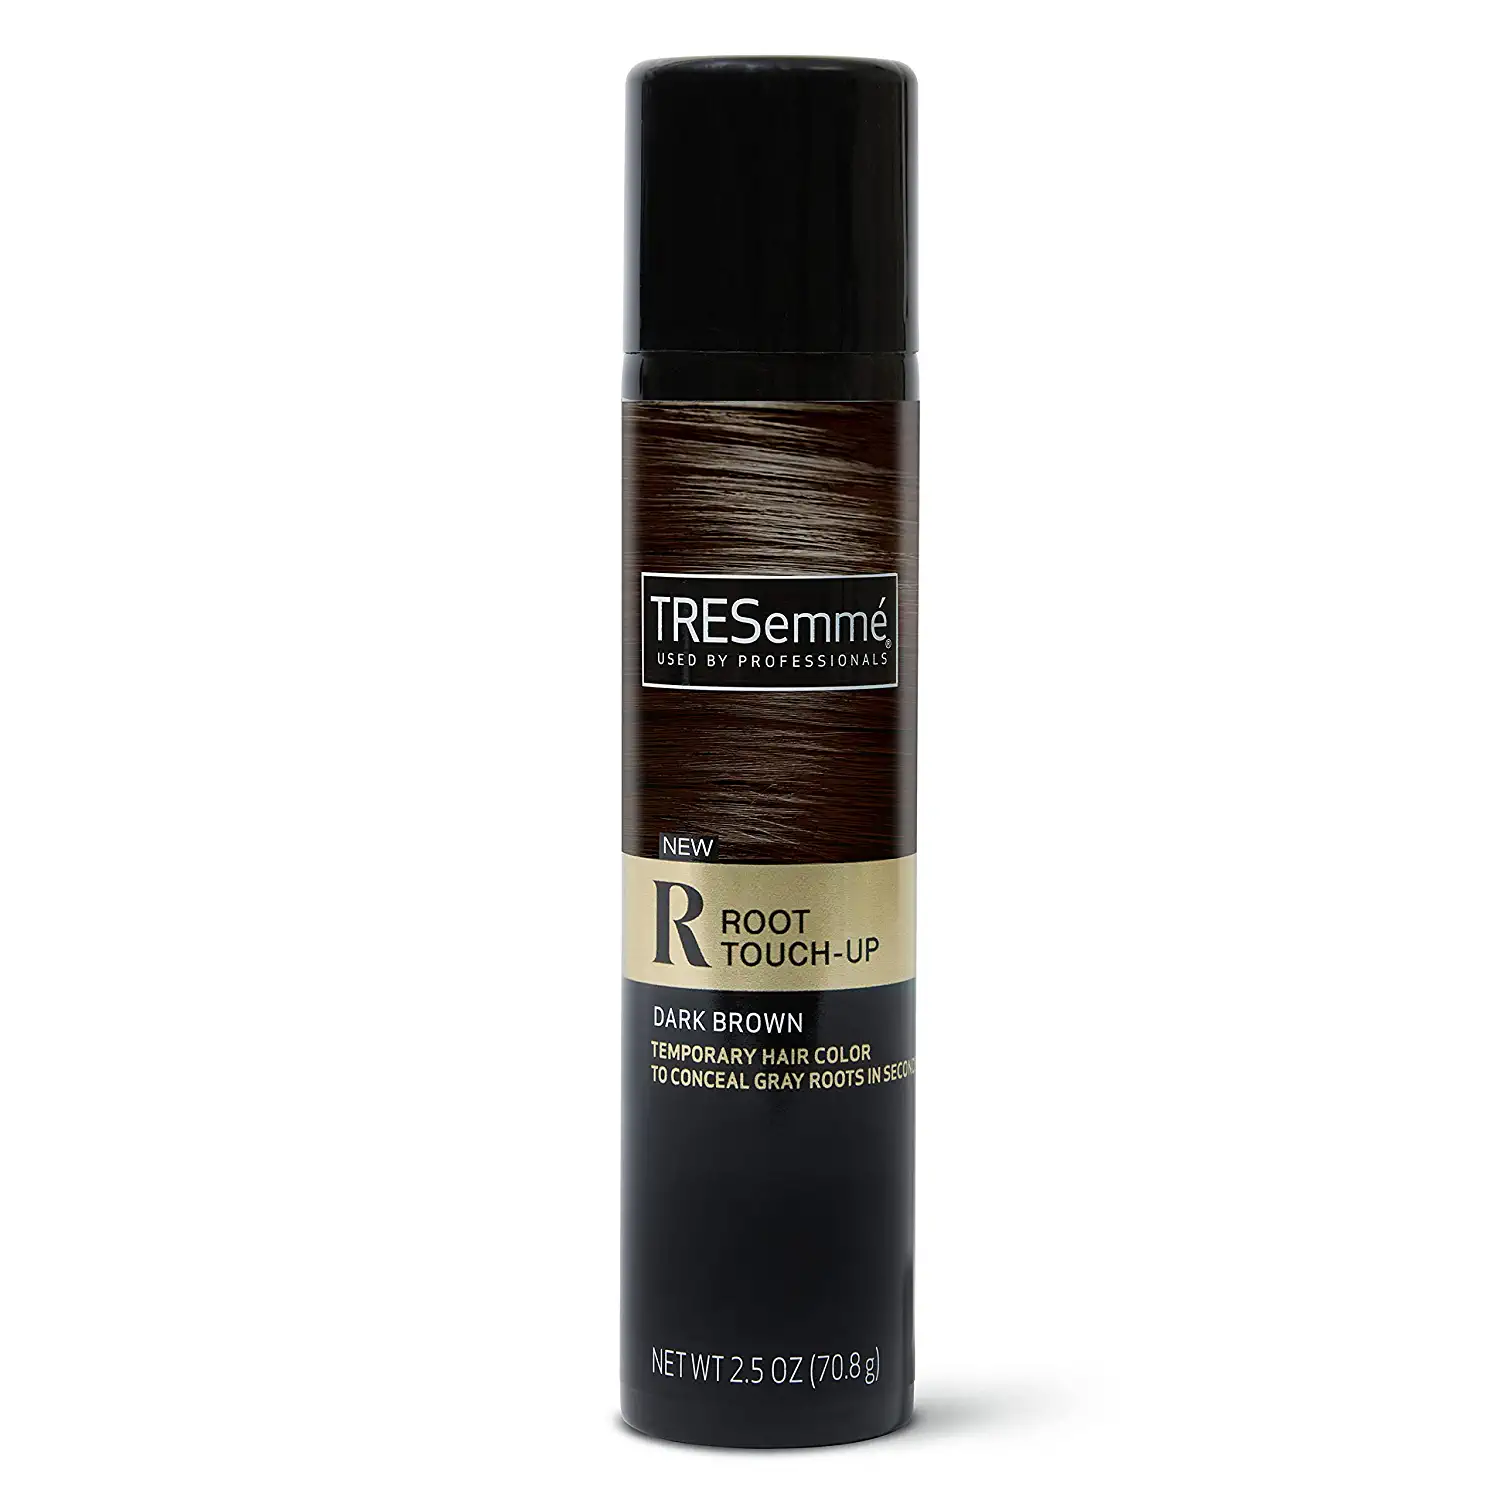 TRESemmé Smudge-Proof Root Touch-Up